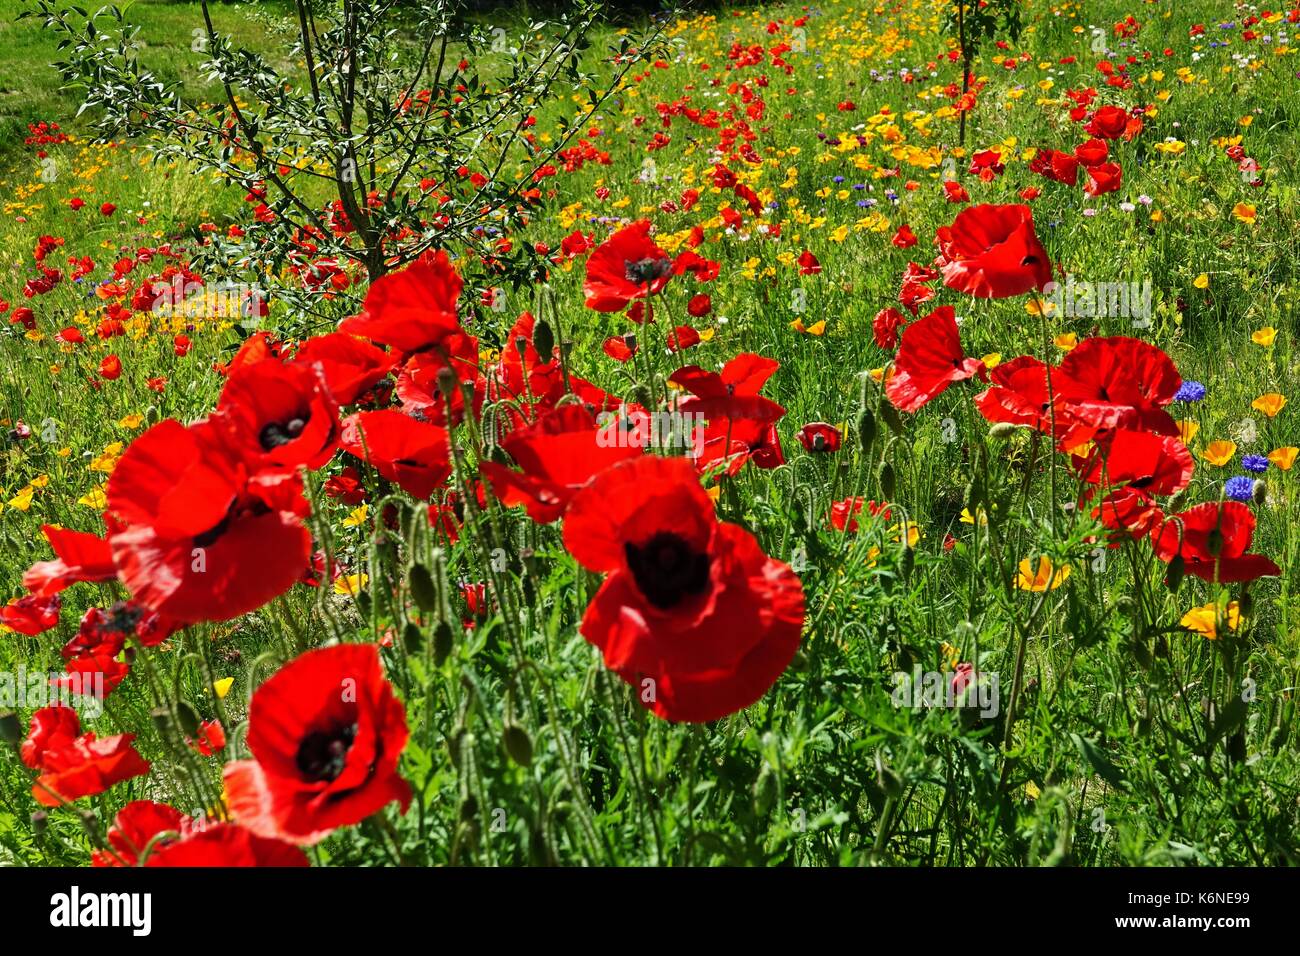 Summer field with poppies Stock Photo